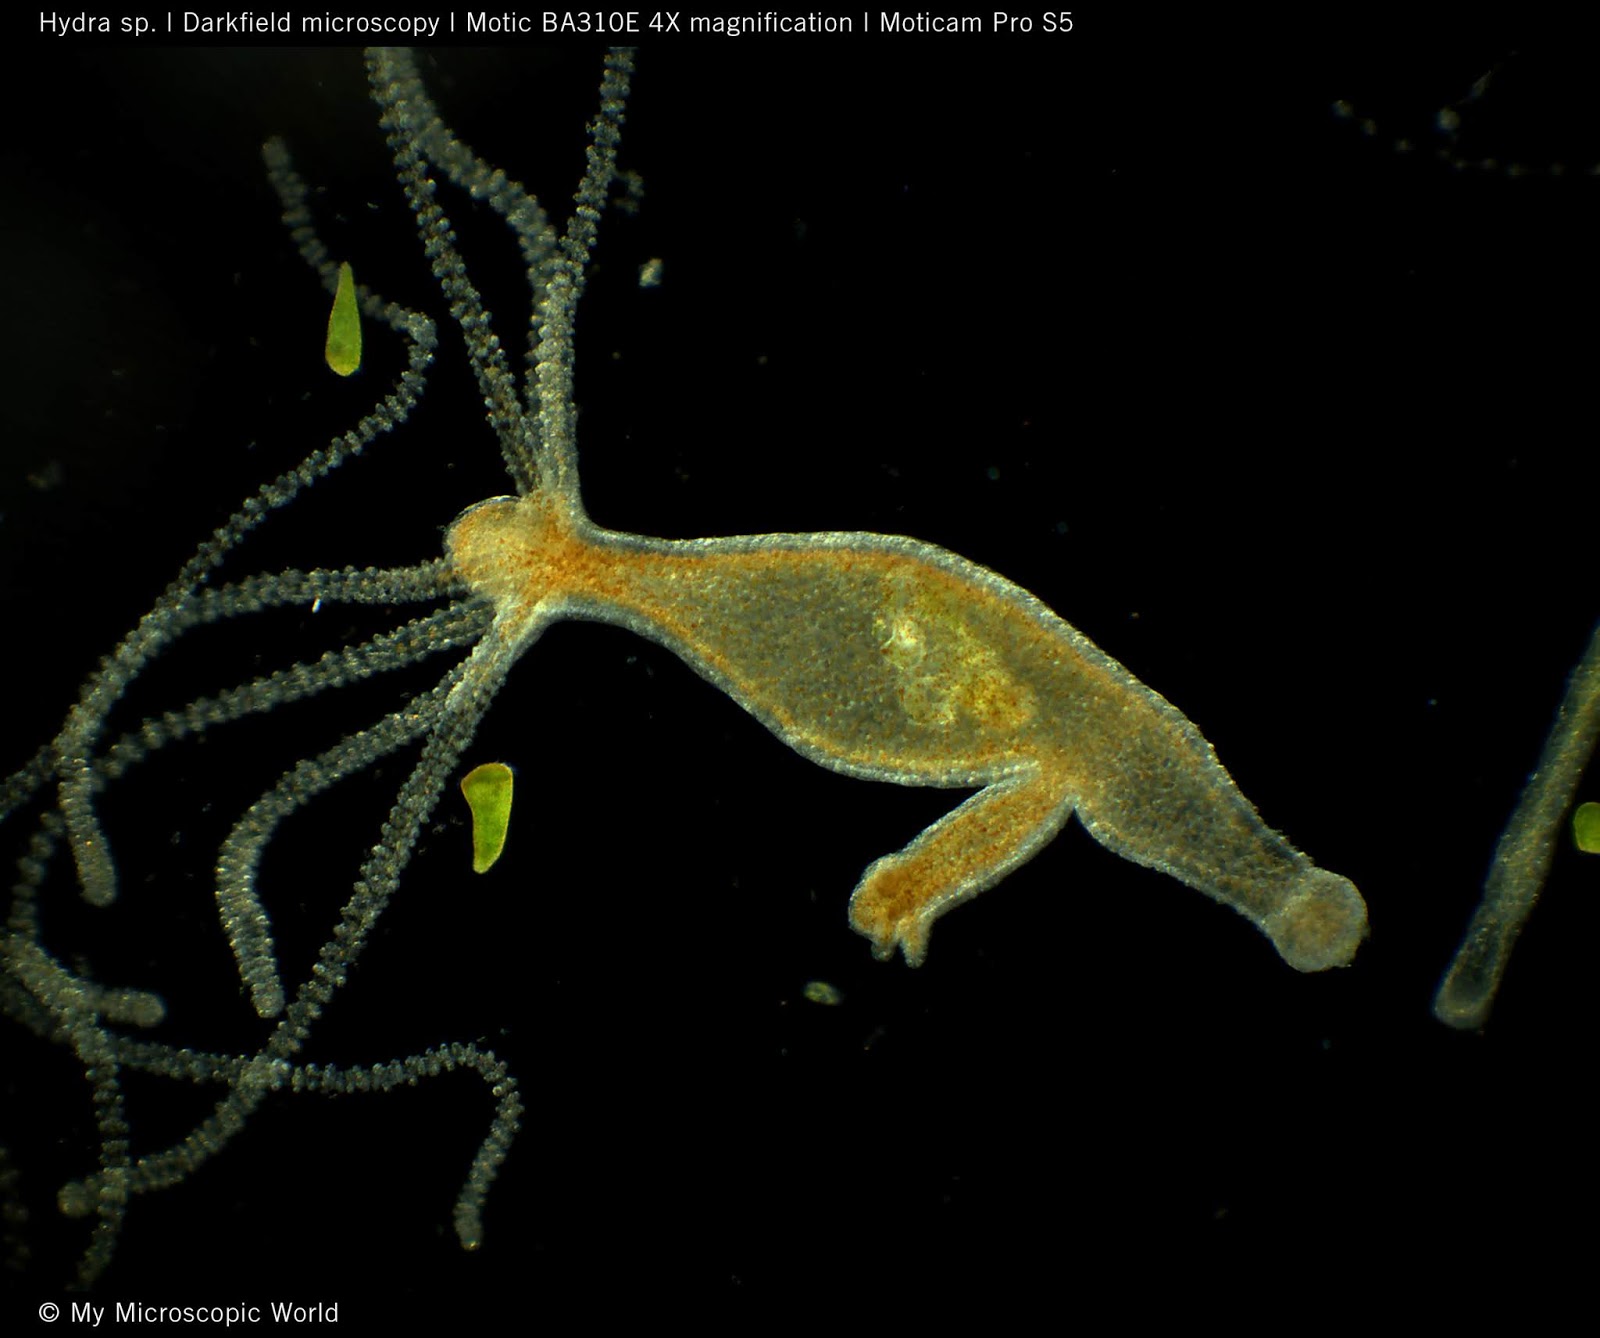 Motic Europe | Blog: Hydra - The immortal monster of the micro world